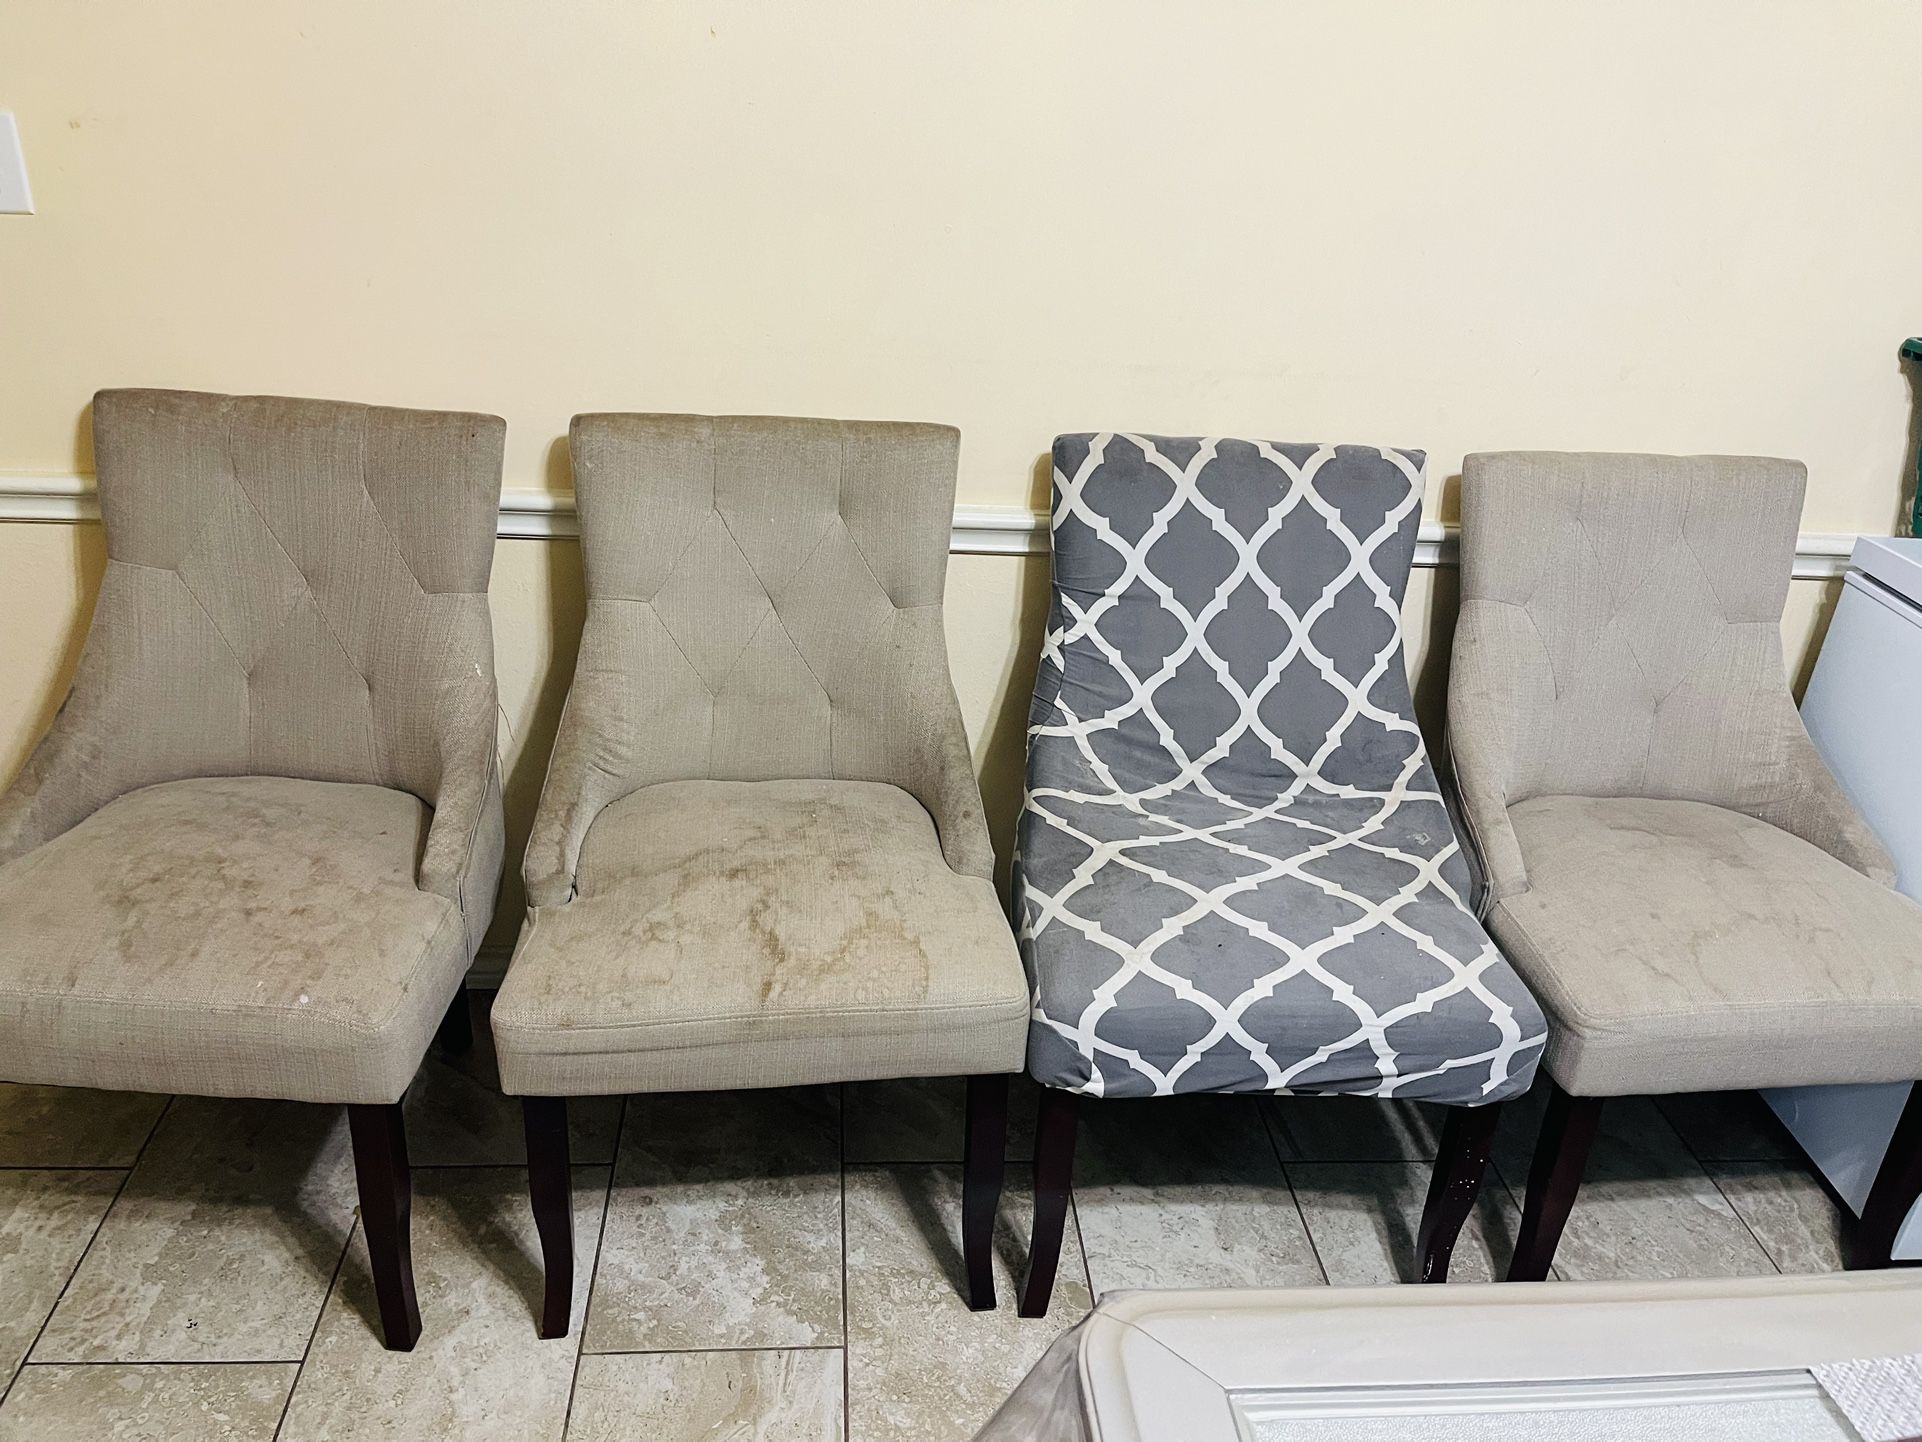 Dining 6 Chairs Very Good Condition 